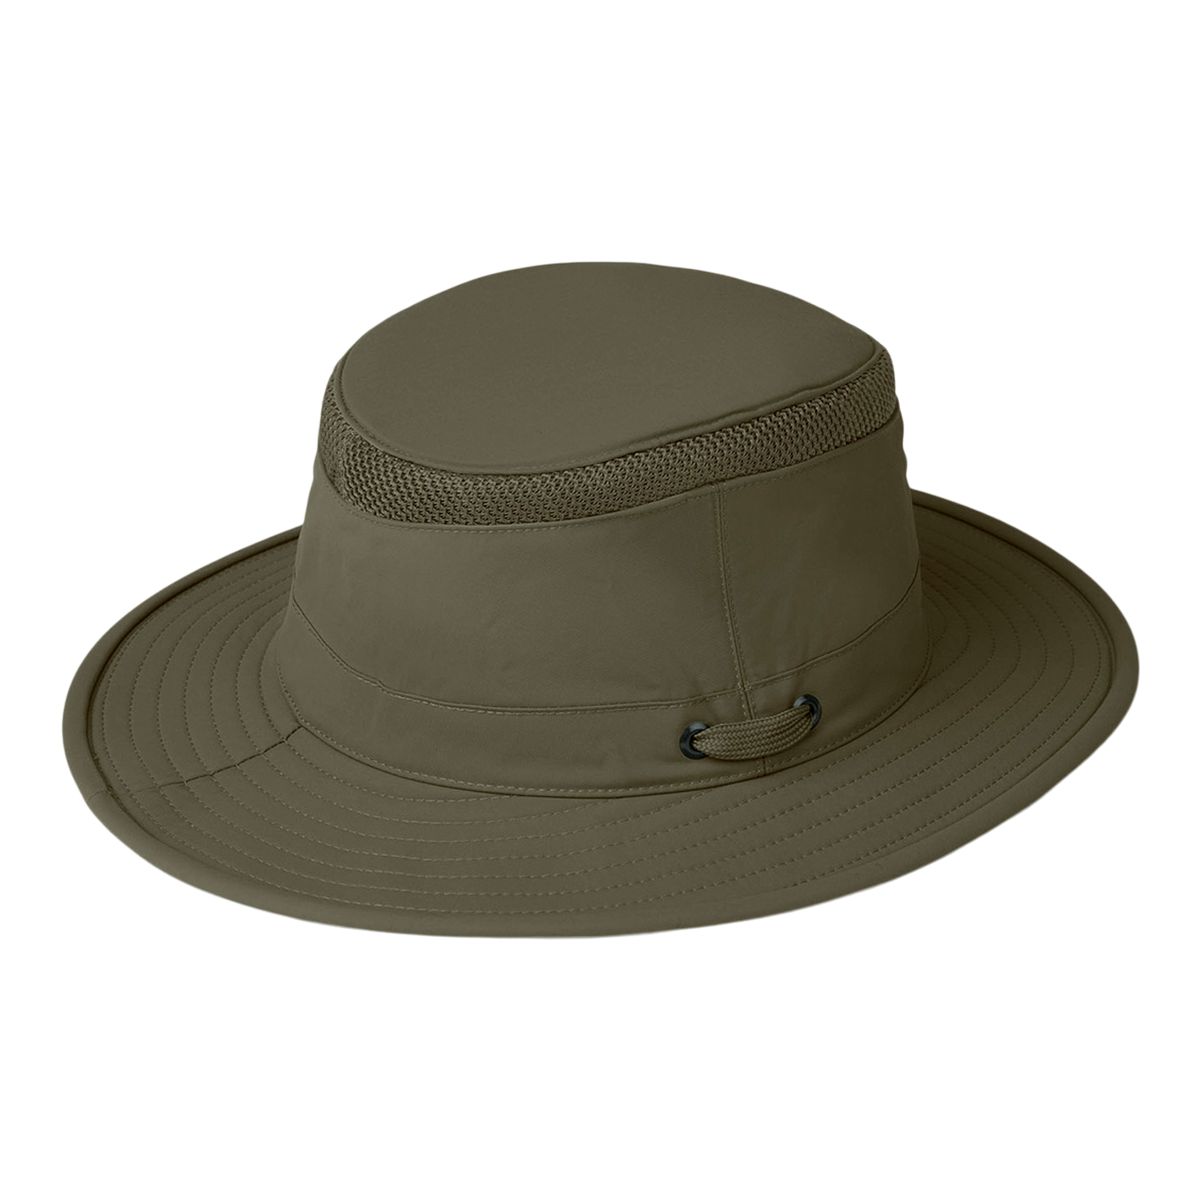 https://media-www.atmosphere.ca/product/div-03-softgoods/dpt-79-clothing-accessories/sdpt-02-womens/333804226/tilley-airflo-broad-brim-hat-821-olive-64f9570c-20ee-4e0a-b035-bb7716bd09b8-jpgrendition.jpg?imdensity=1&imwidth=1244&impolicy=mZoom